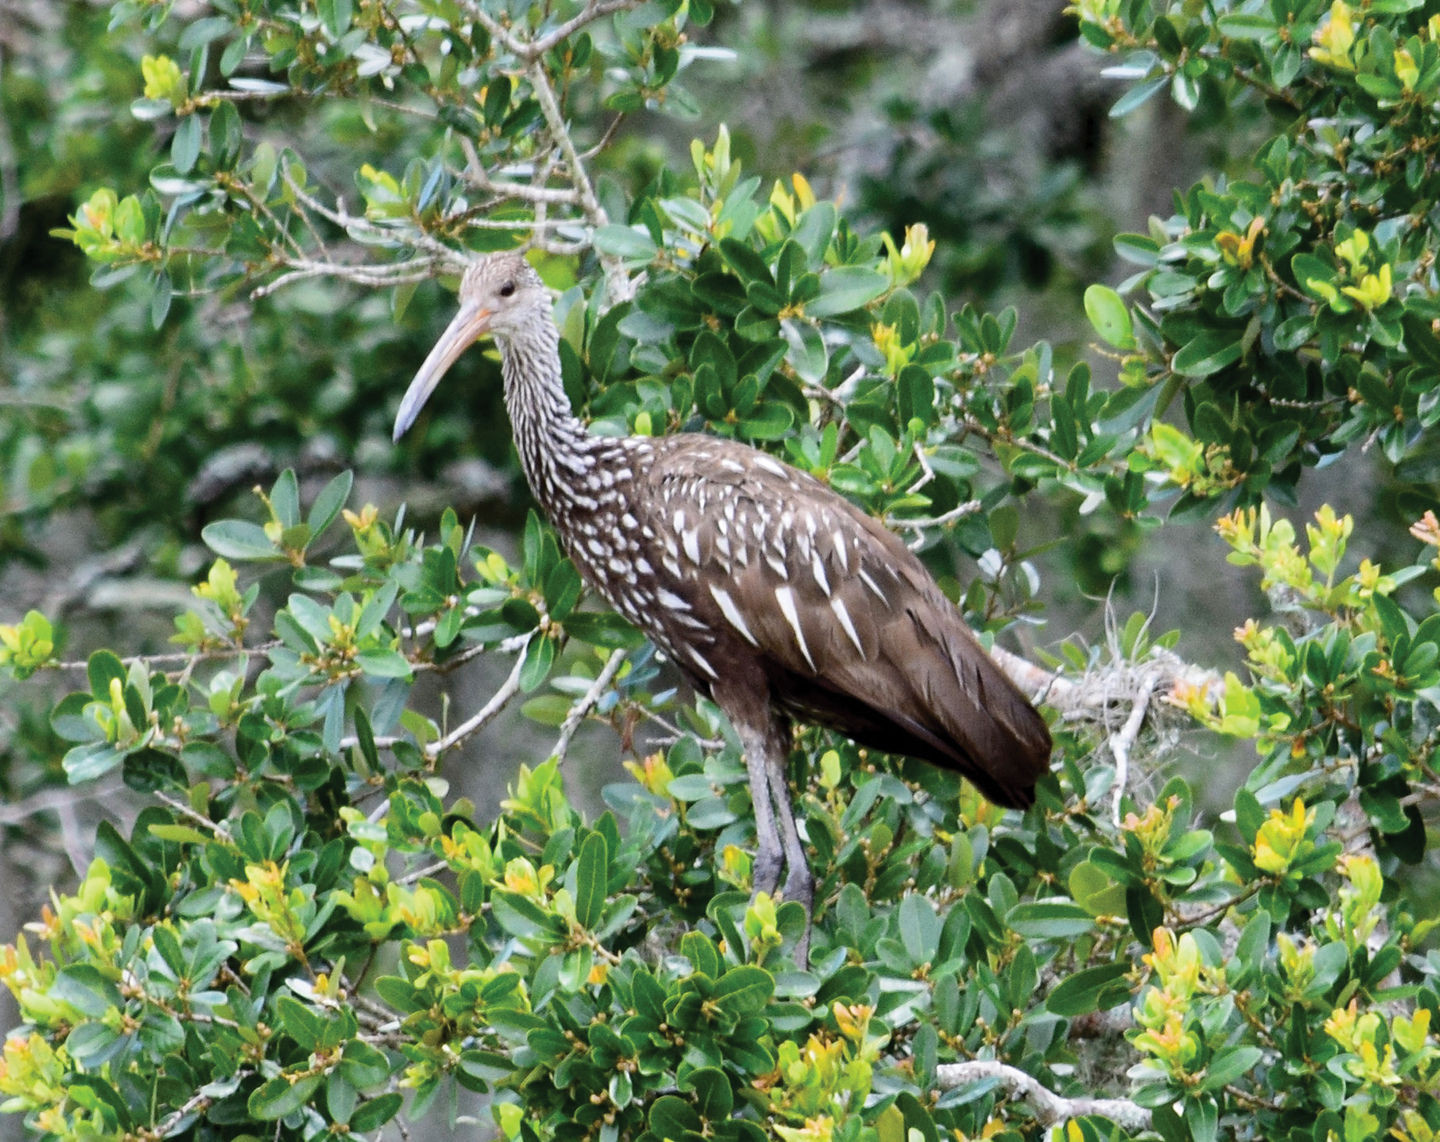 Mary Tygh Parks captured this photo of a limpkin that was hanging out in Myakka River State Park.